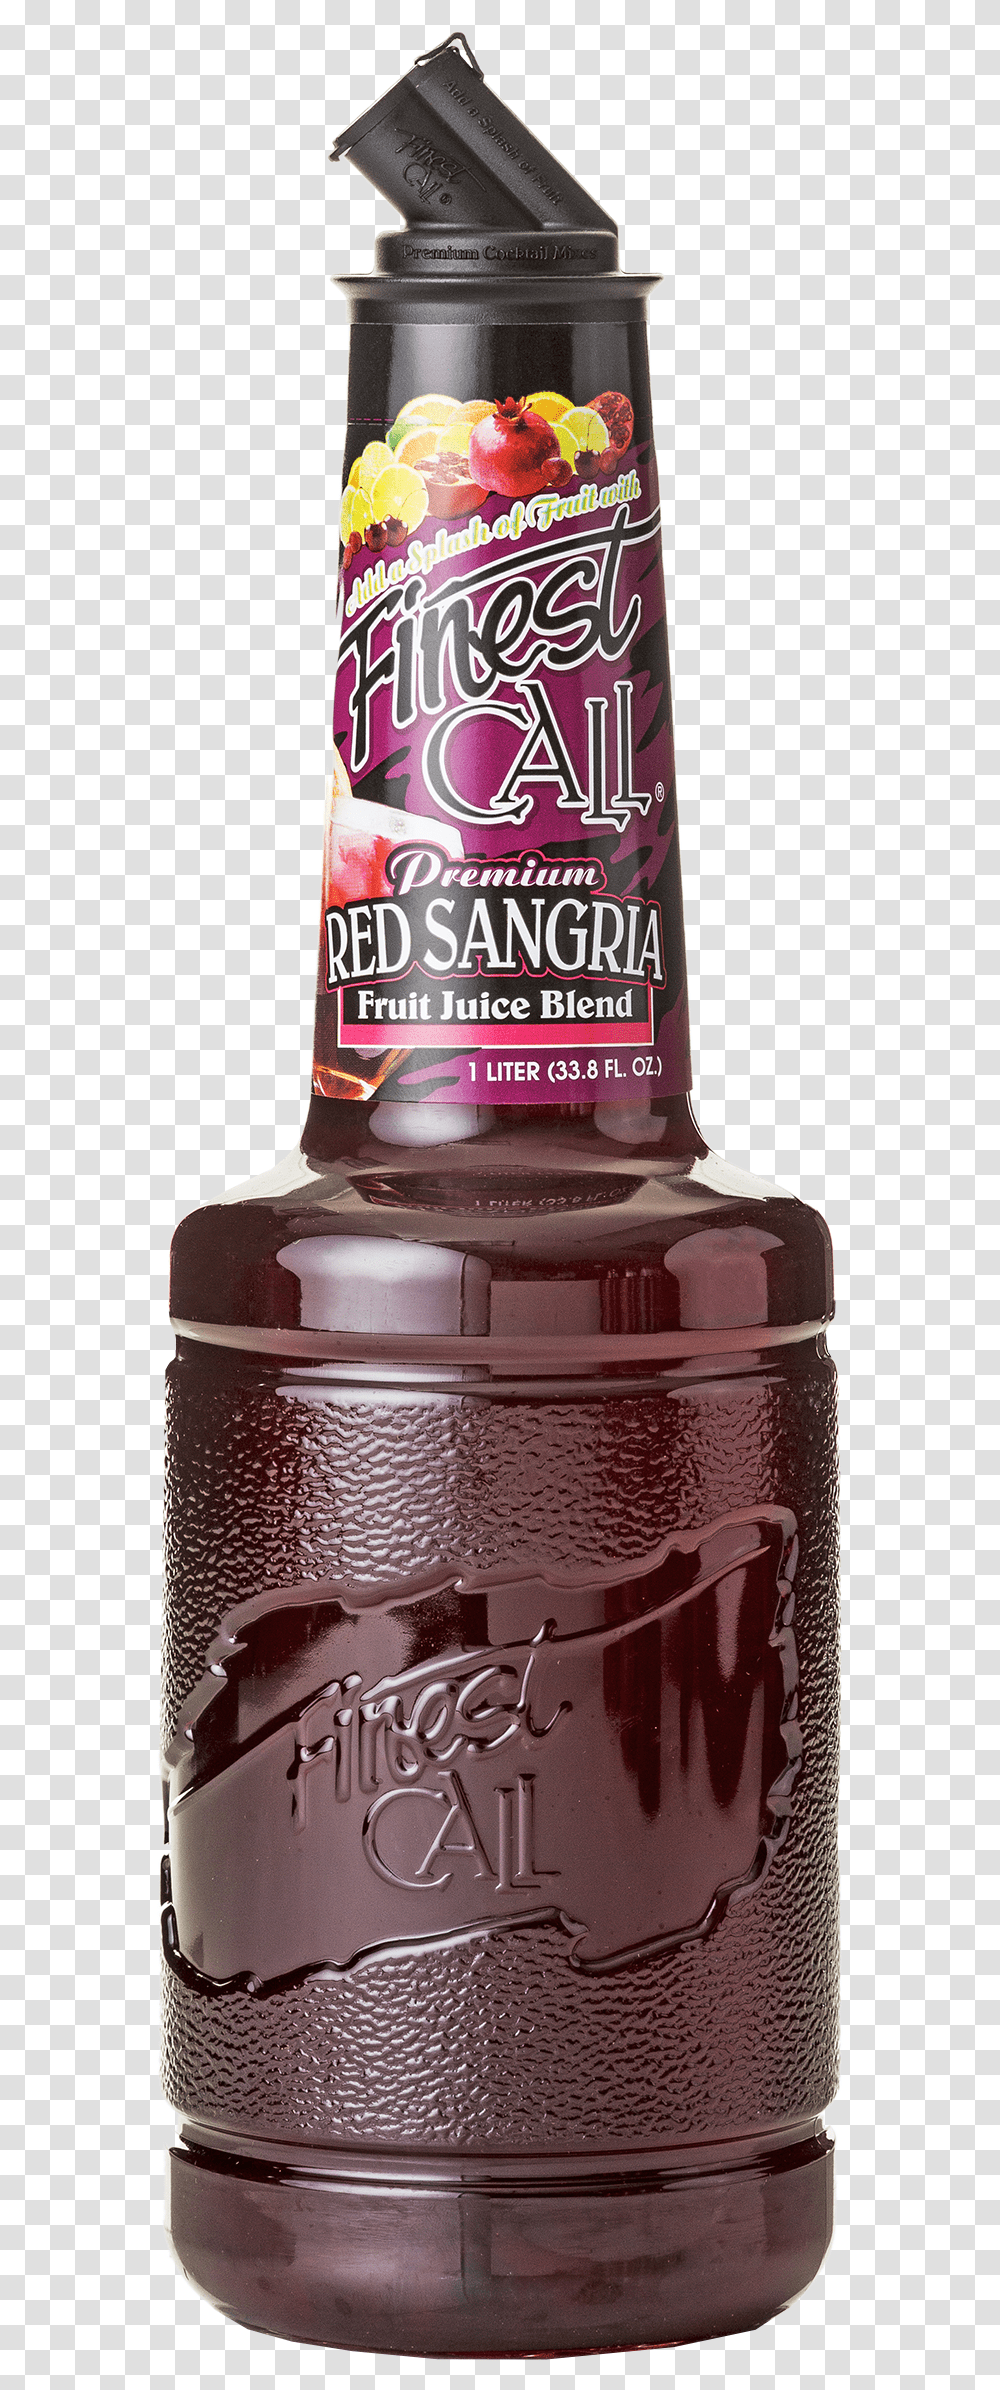 Finest Call Raspberry Puree, Beer, Alcohol, Beverage, Drink Transparent Png